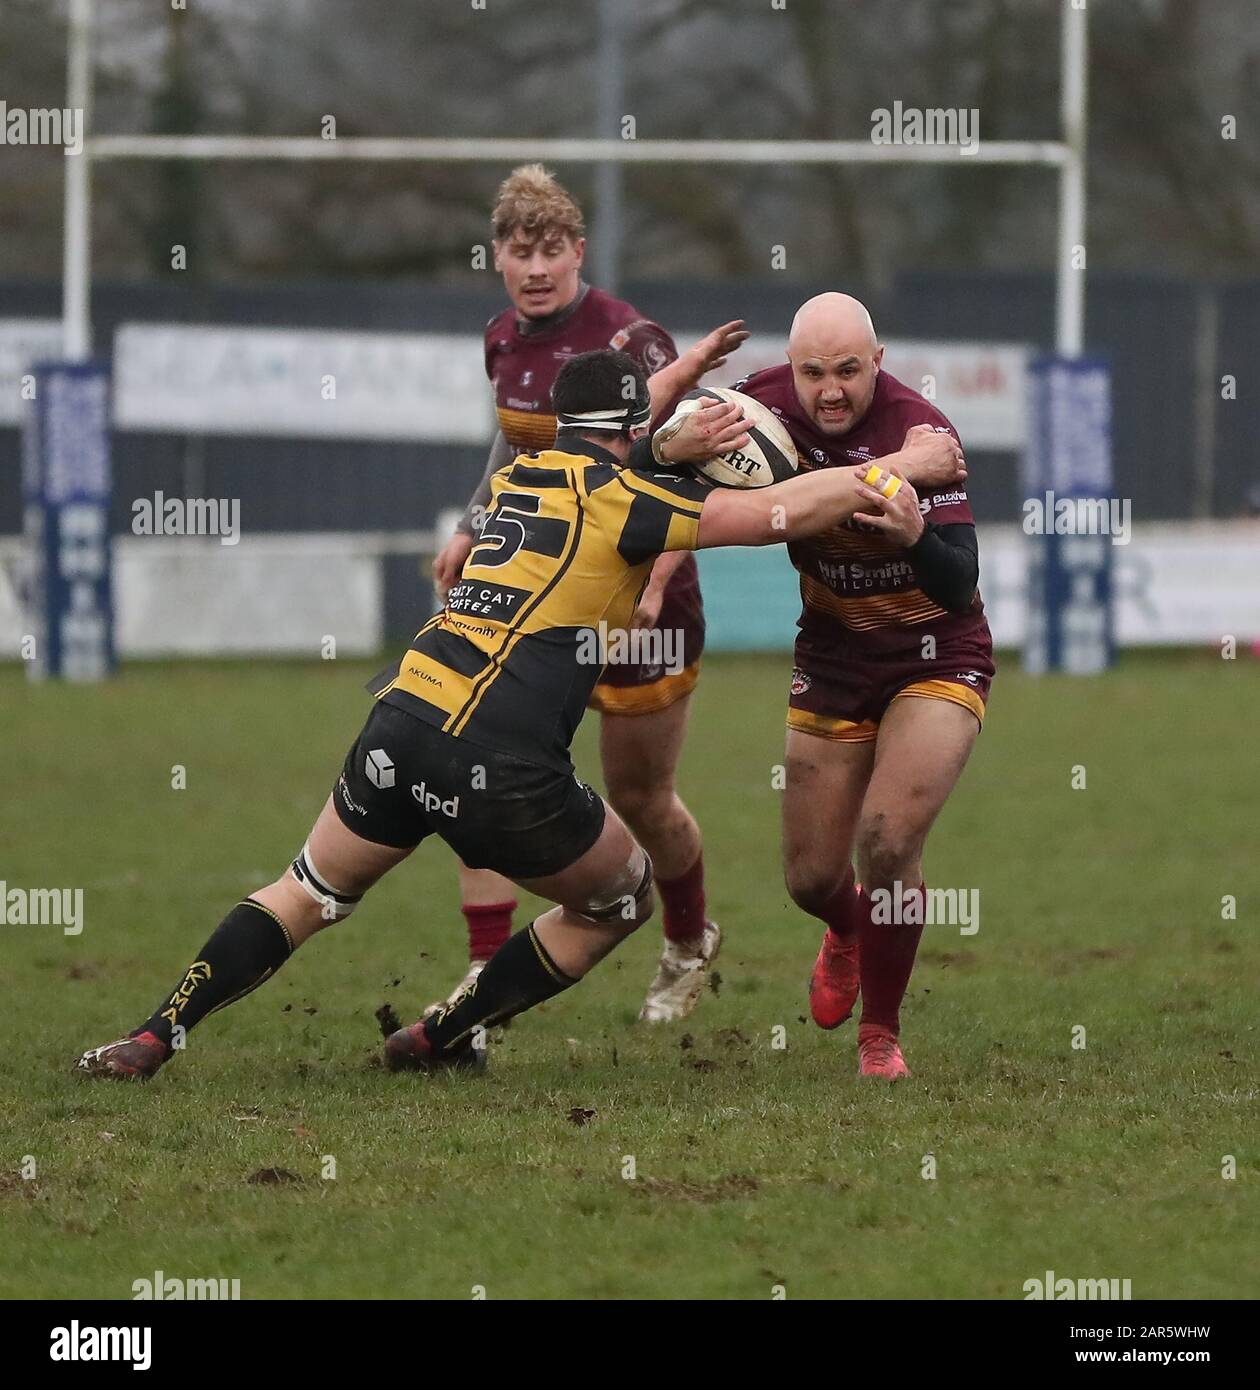 25.01.2020, Hinckley, Leicester, England. Rugby Union, Hinckley rfc v Sedgley Park rfc.   Rob Holloway on the charge Sedgley Park during the RFU National League 2 North (NL2N) game played at the Leicester  Road Stadium. Stock Photo